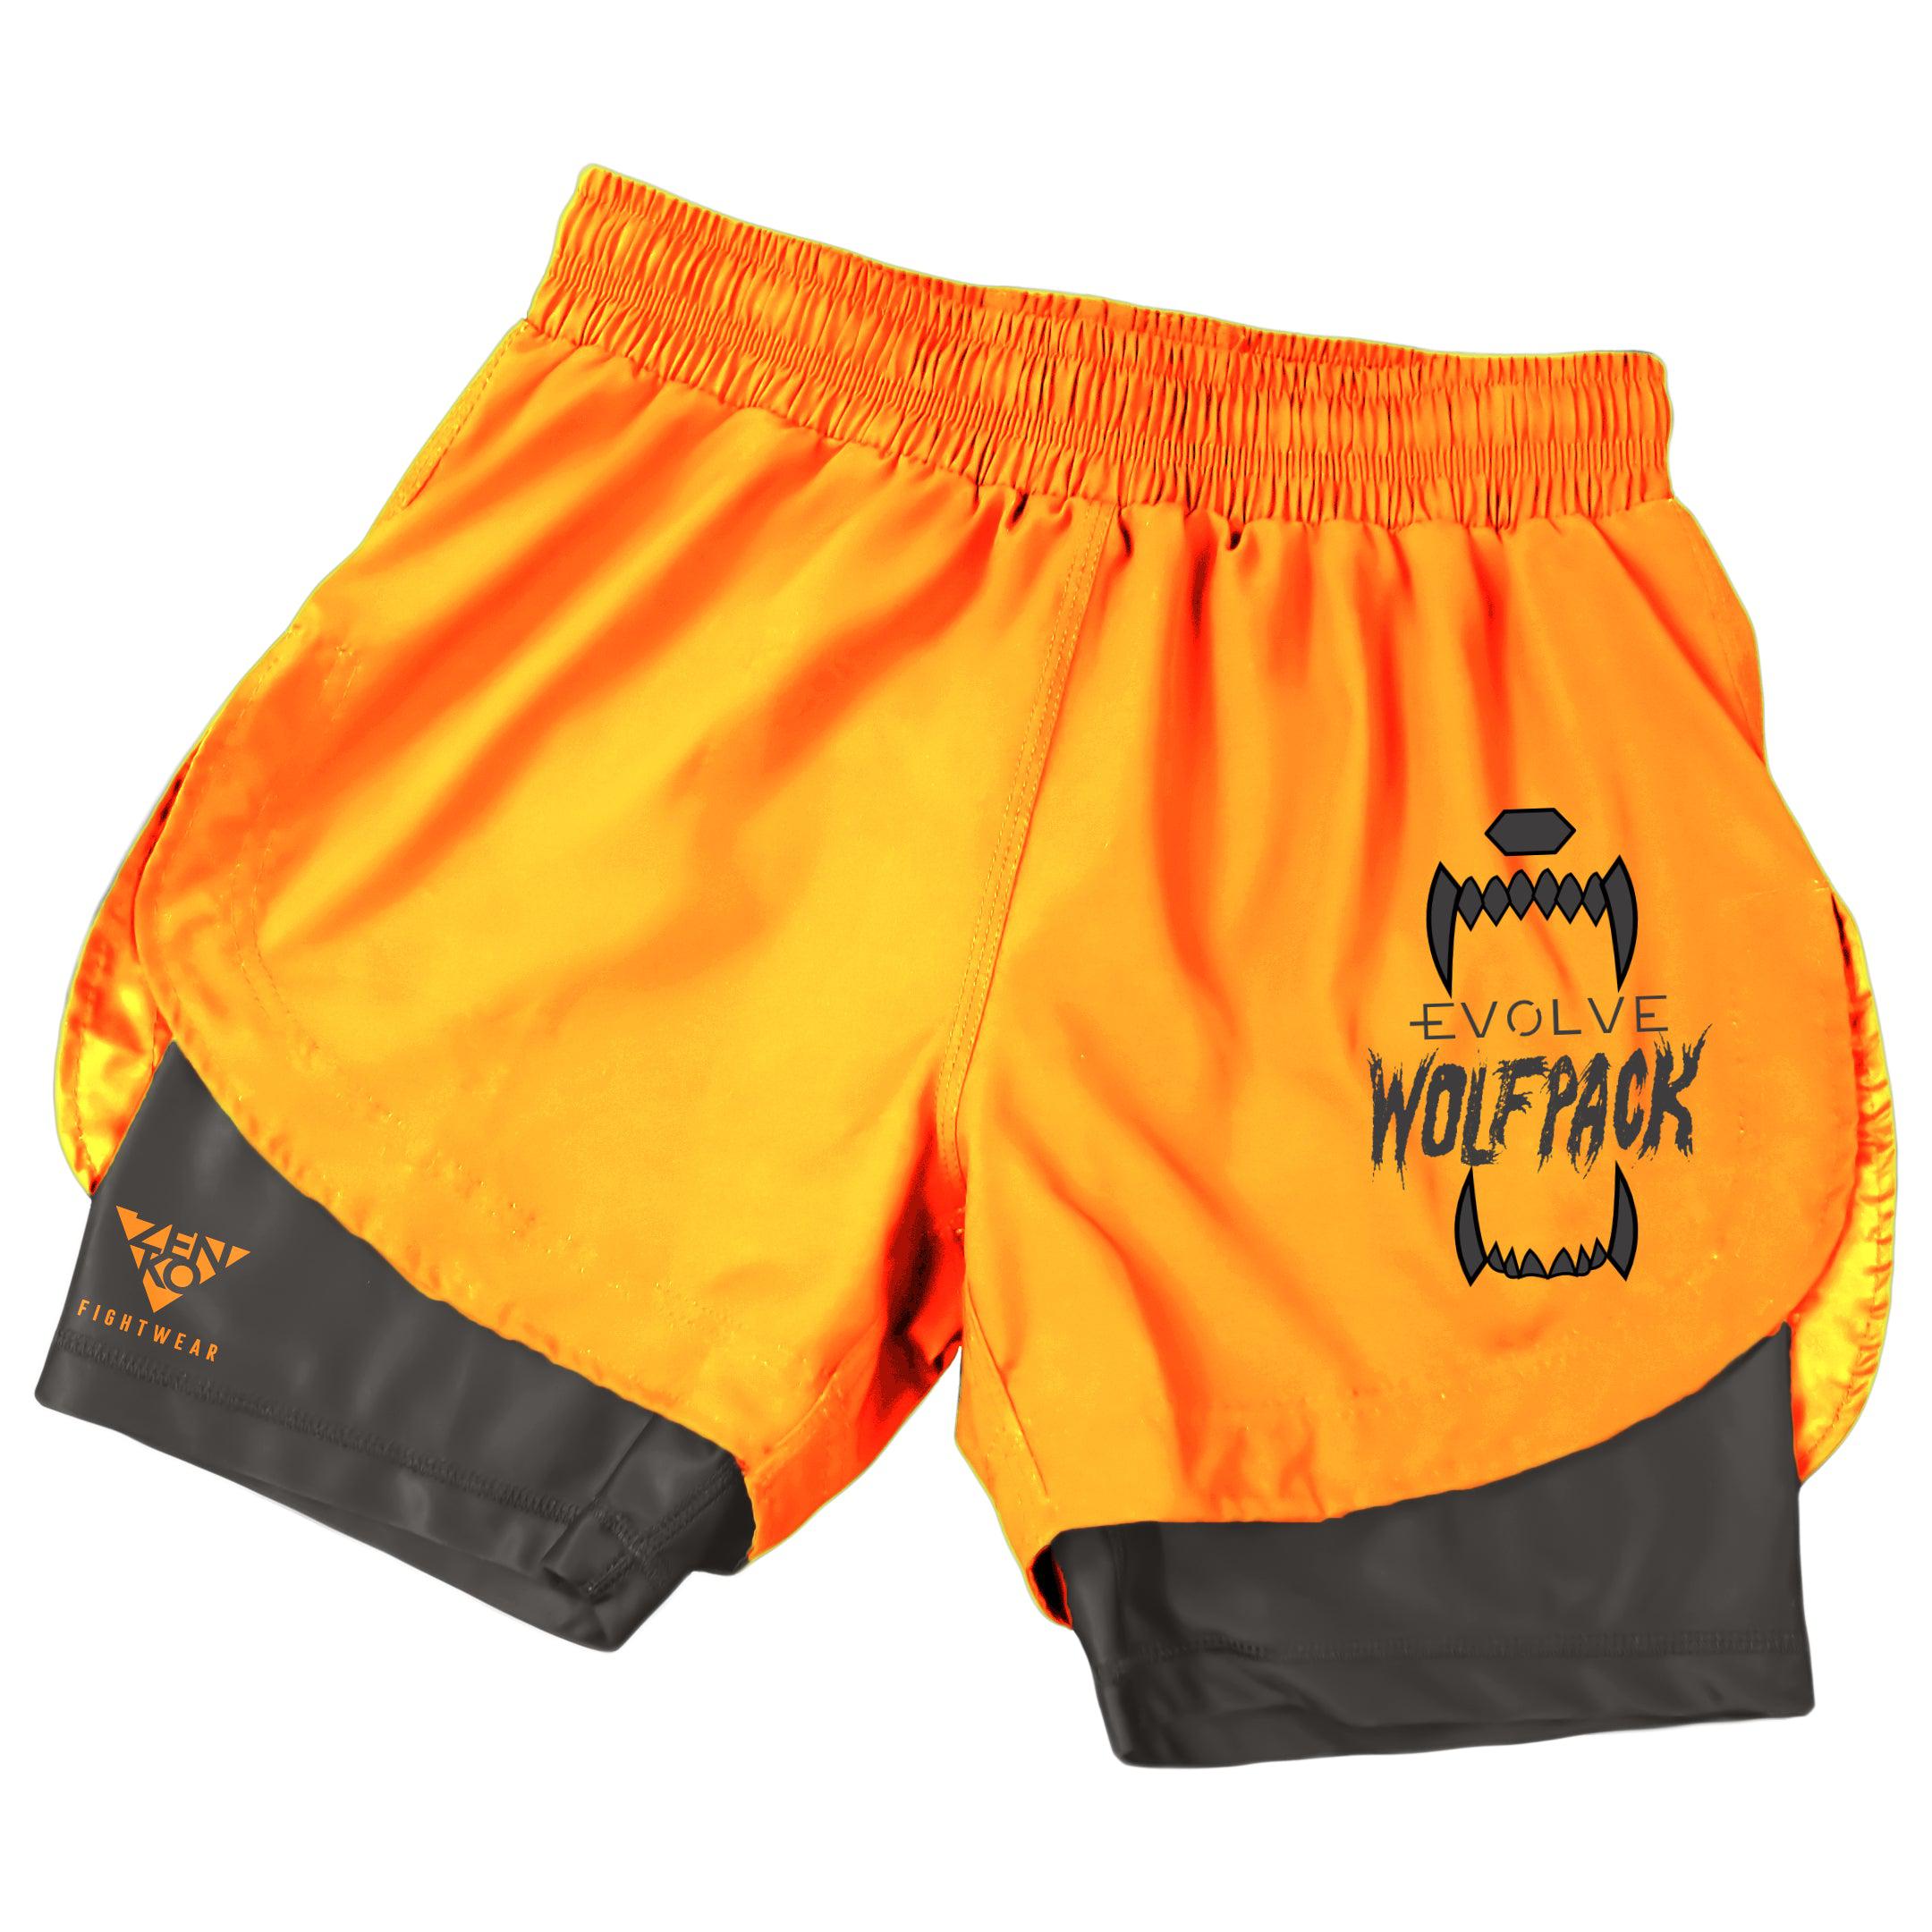 Evolve Wolfpack Duo Shorts